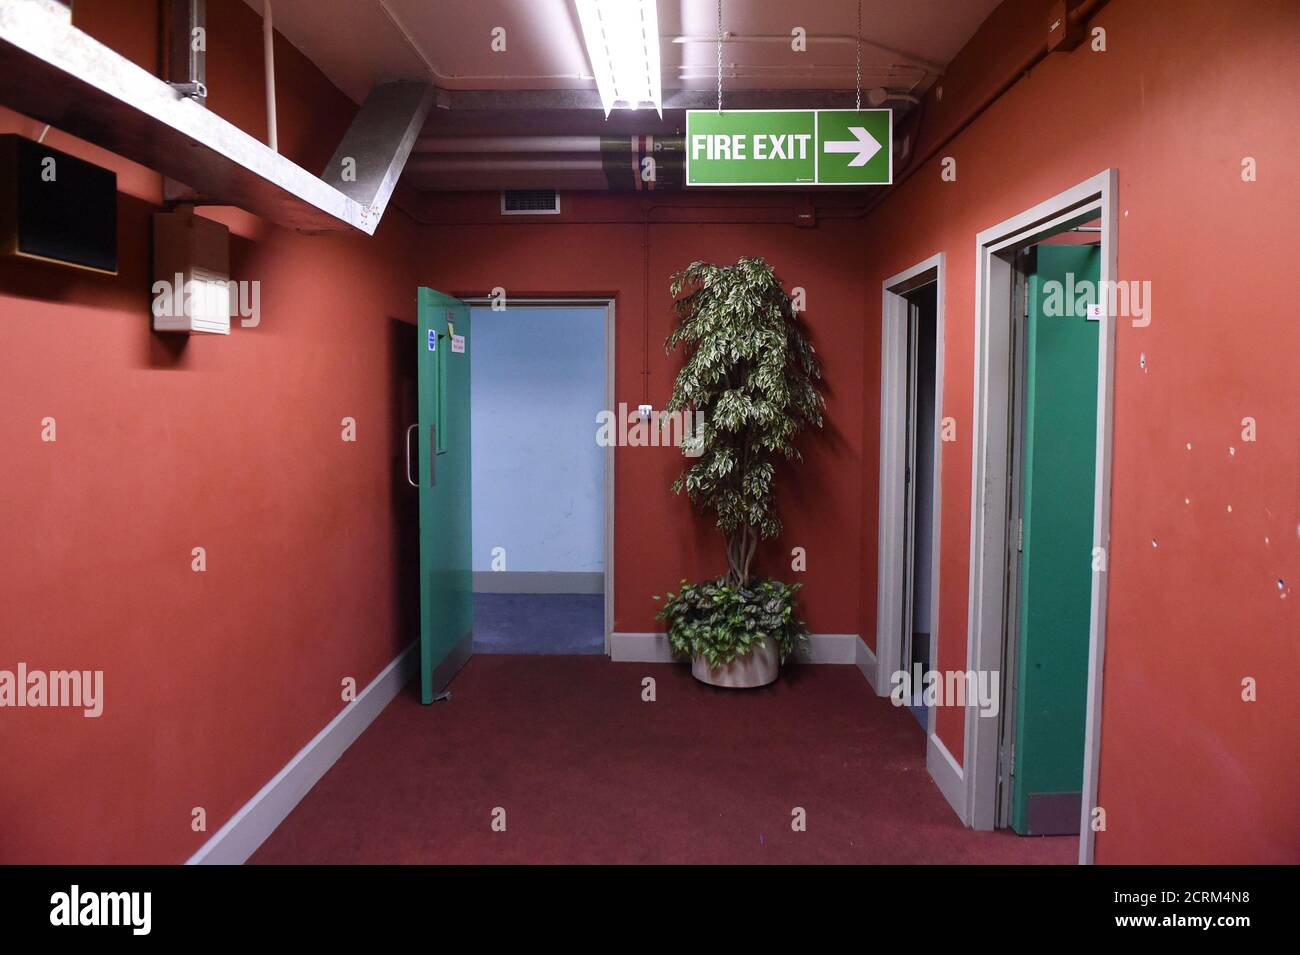 Corridor is seen in a former Regional Government HQ Nuclear bunker built by the British government during the Cold War which  has come up for sale in Ballymena, Northern Ireland on February 4, 2016. It is owned by the Office of Northern Ireland's First Minister and Deputy First Minister and capable of accommodating 236 personnel for extended periods. A large range of the original fixtures and fittings are to be included in the sale. It is believed to be one of the most technically advanced bunkers built in the UK with an array of advanced life support systems. In the event of a nuclear attack, Stock Photo